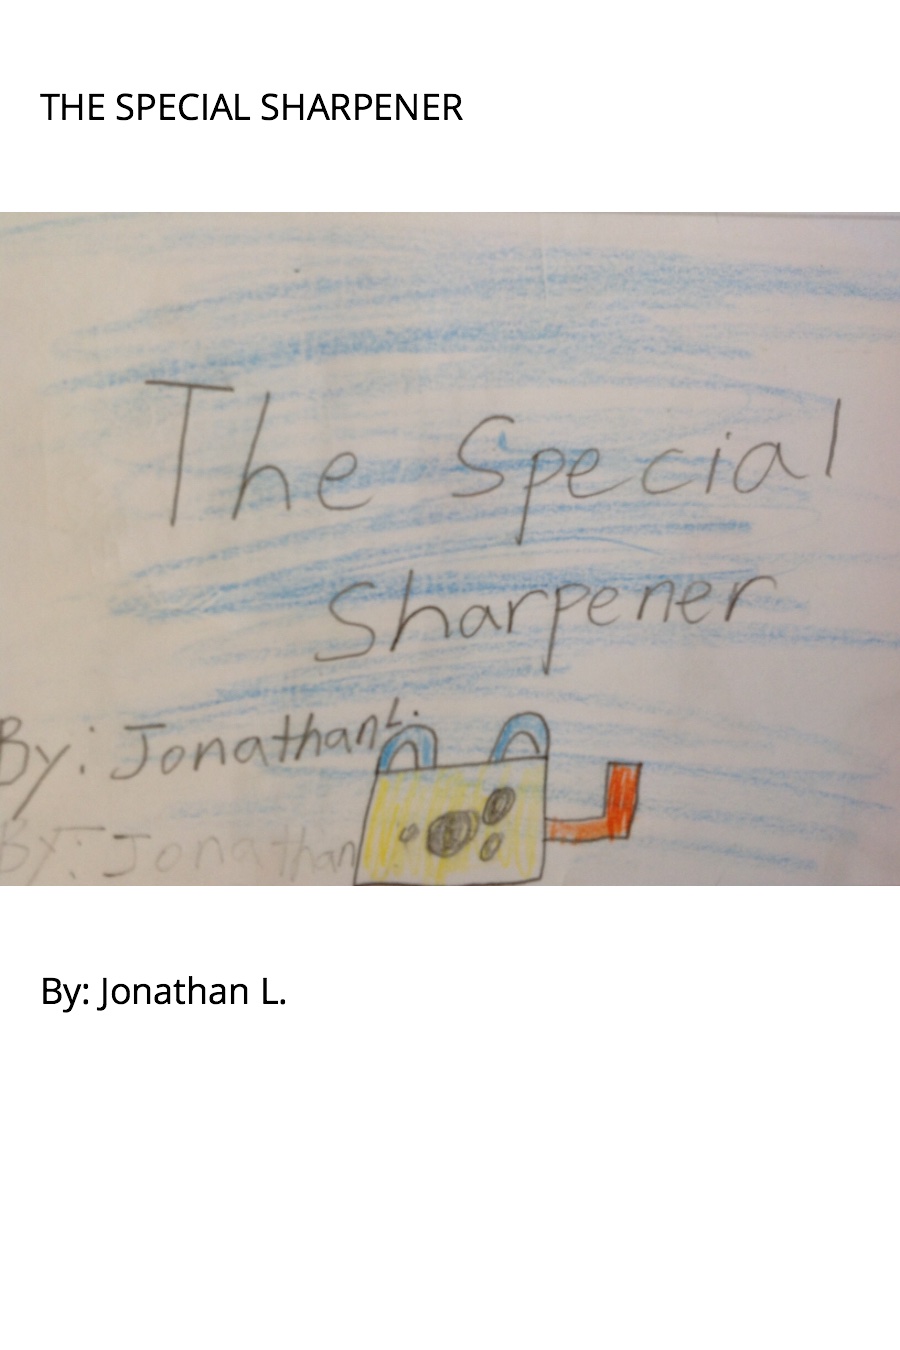 The Special Sharpener by Jonathan L